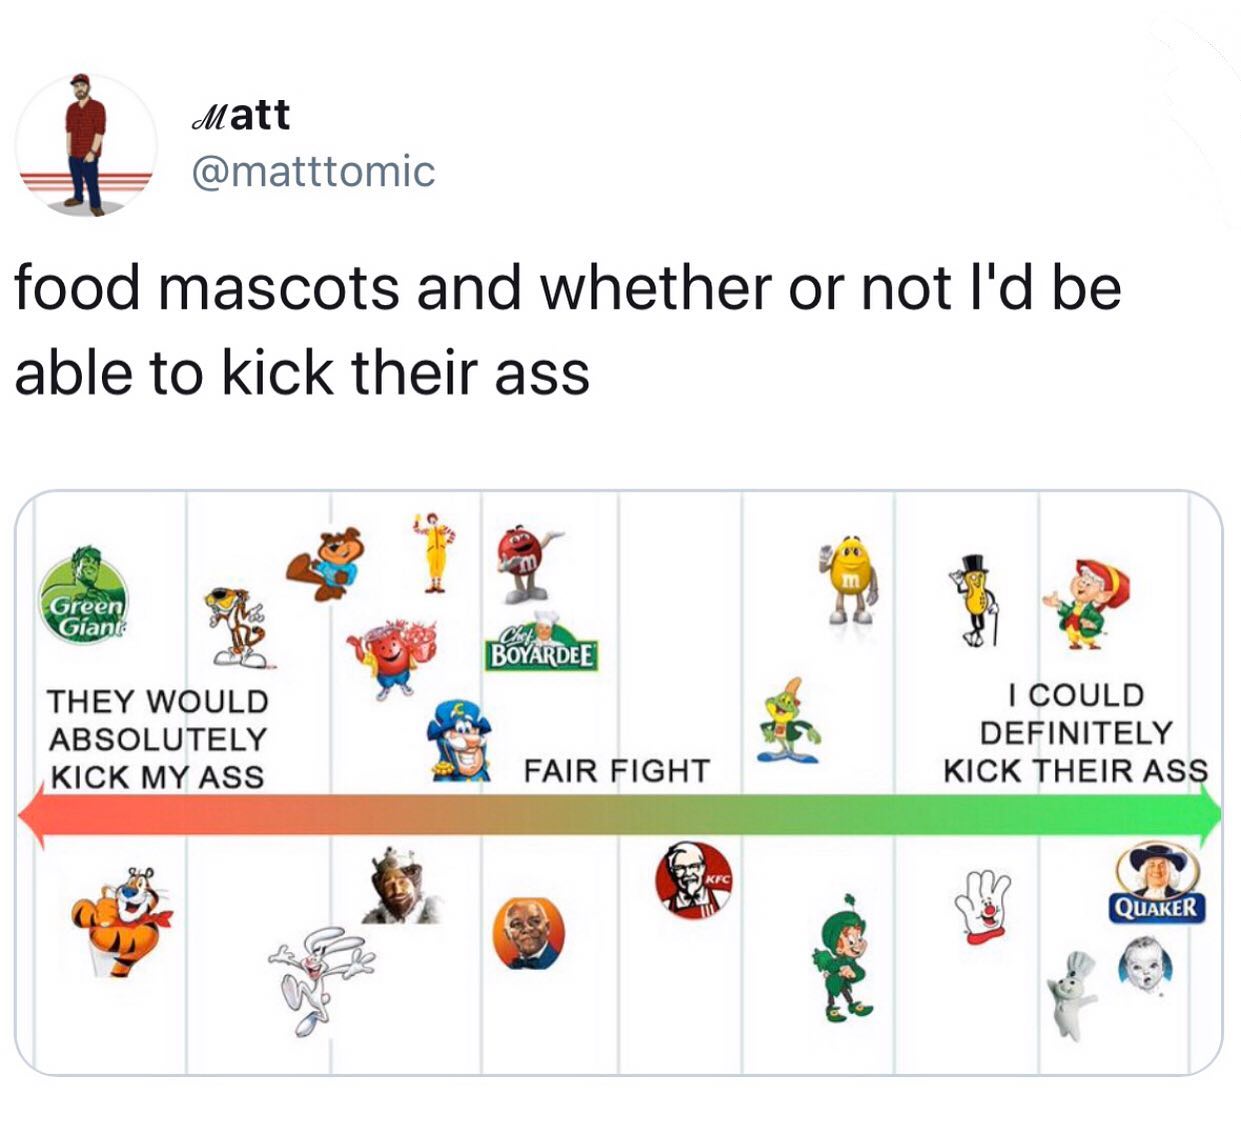 funny memes and pics - food mascots and whether or not - Matt food mascots and whether or not I'd be able to kick their ass Green Giant They Would Absolutely Kick My Ass Boyardee Fair Fight Kfc I Could Definitely Kick Their Ass Quaker